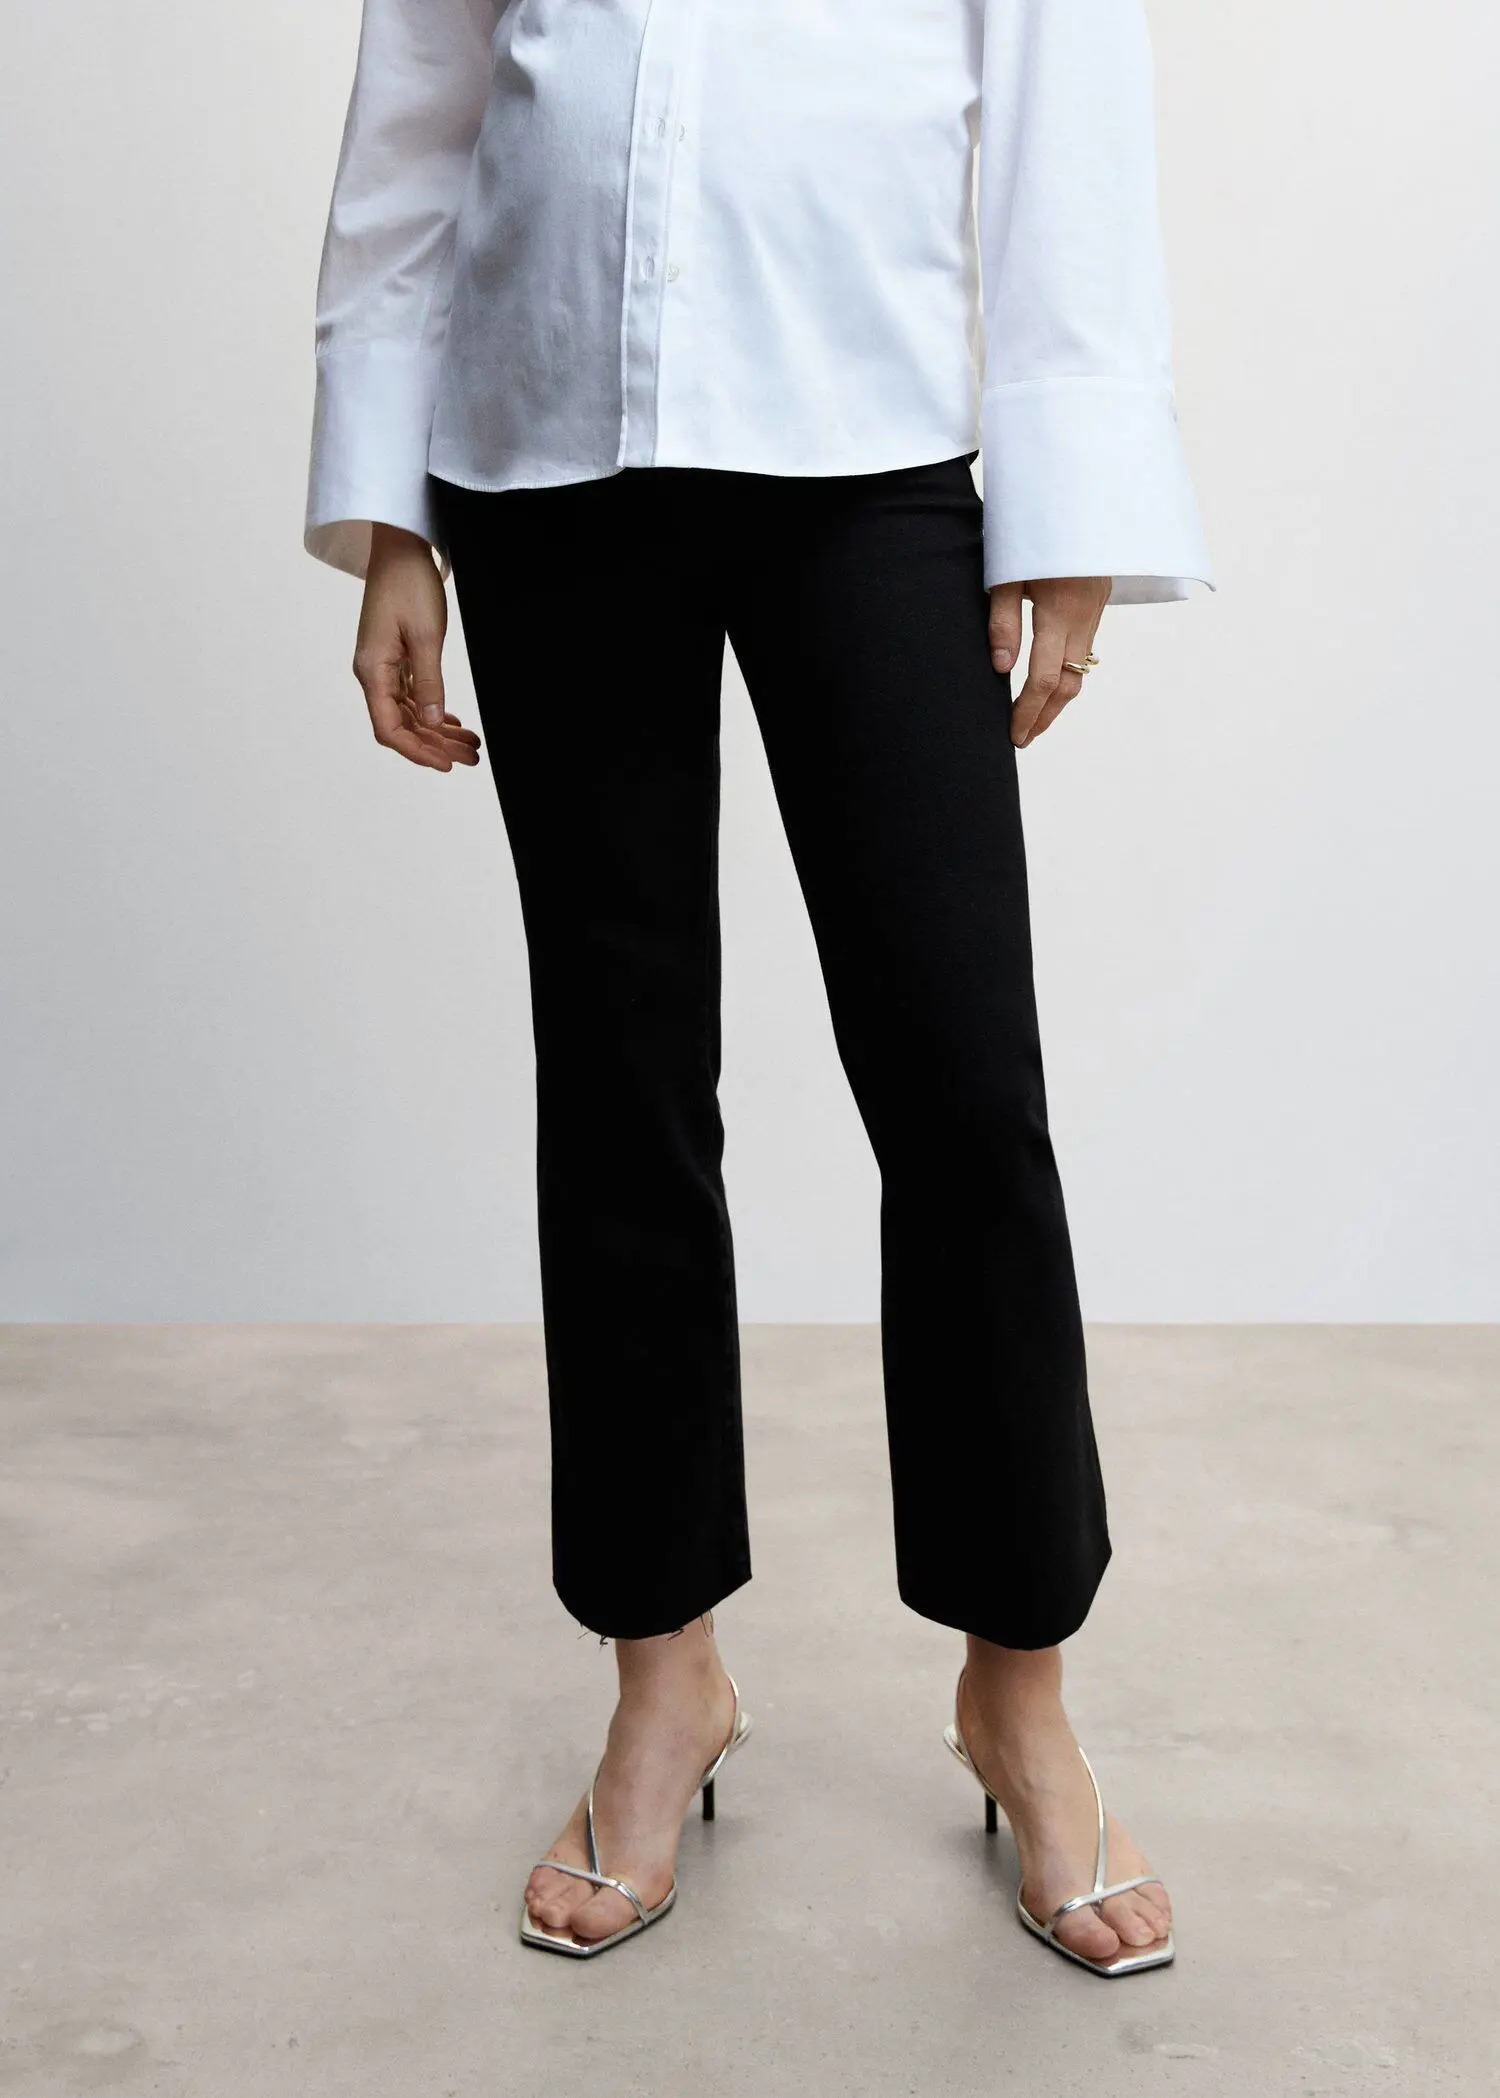 Mango Maternity flared cropped jeans. a woman wearing black pants and a white shirt. 